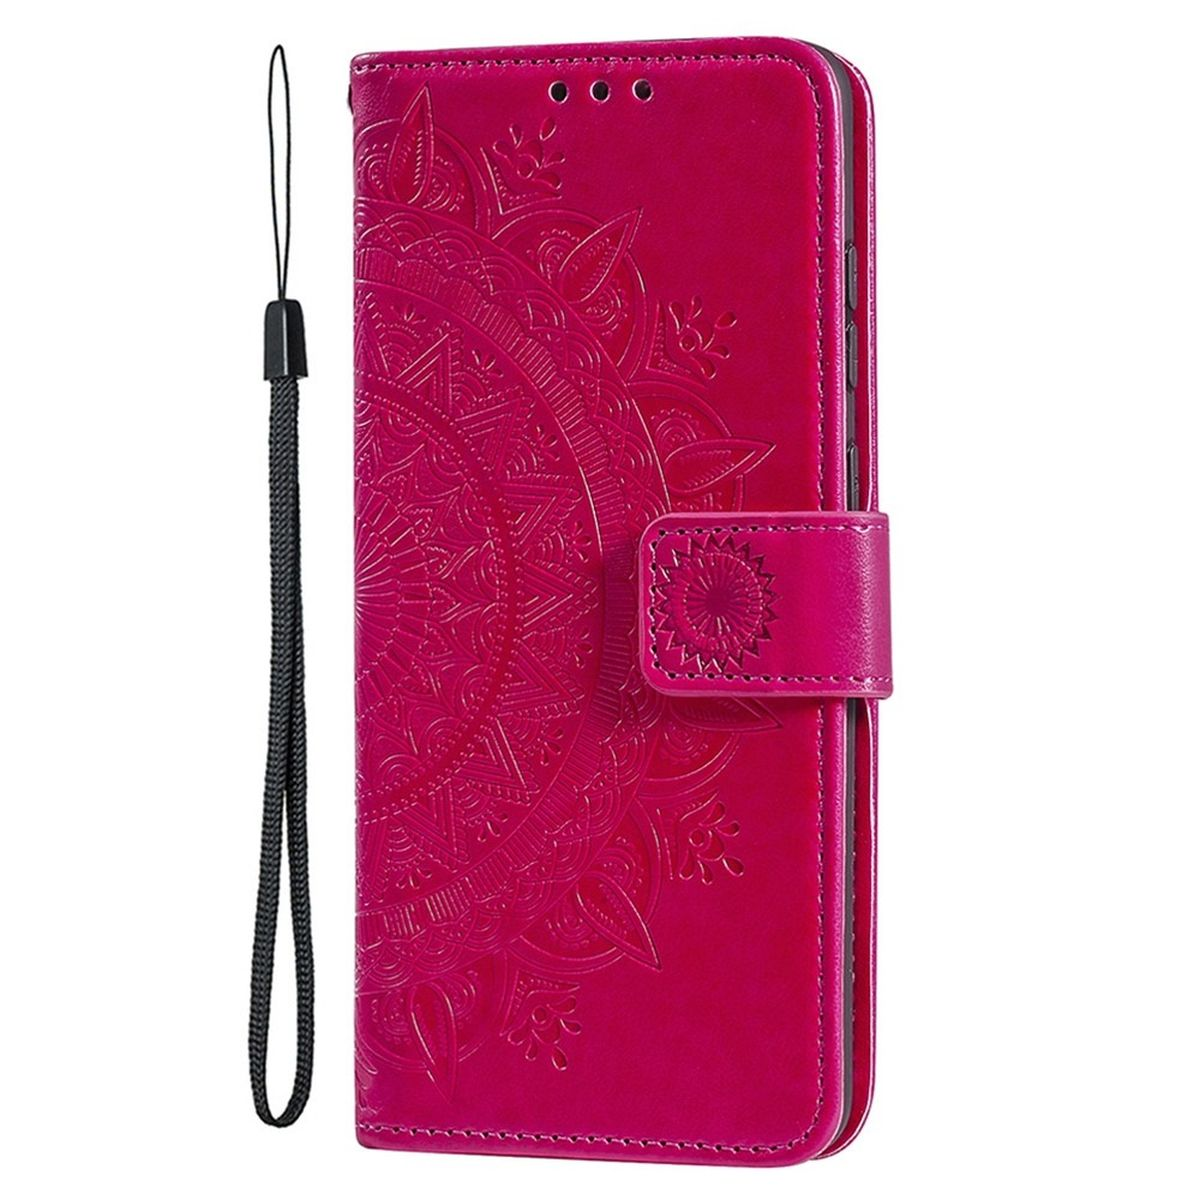 Pro, Bookcover, Pink Muster, iPhone Apple, Klapphülle Mandala COVERKINGZ 14 mit